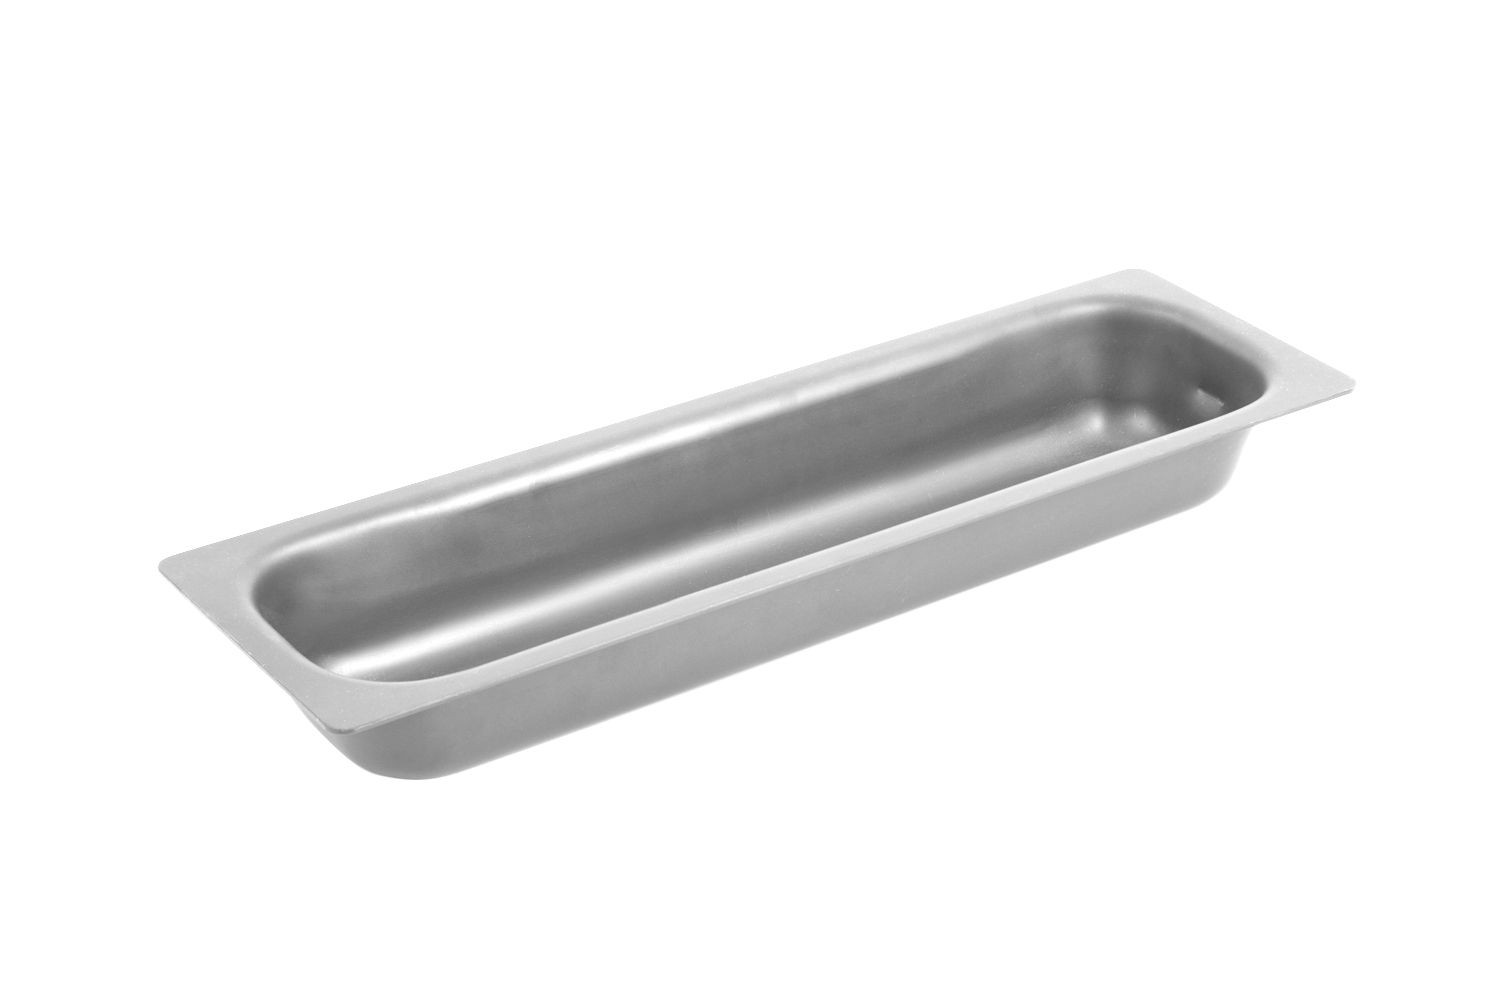 Bon Chef 5094P Half-Size Long Chafer Food Pan, Pewter Glo 3 1/2 Qt.